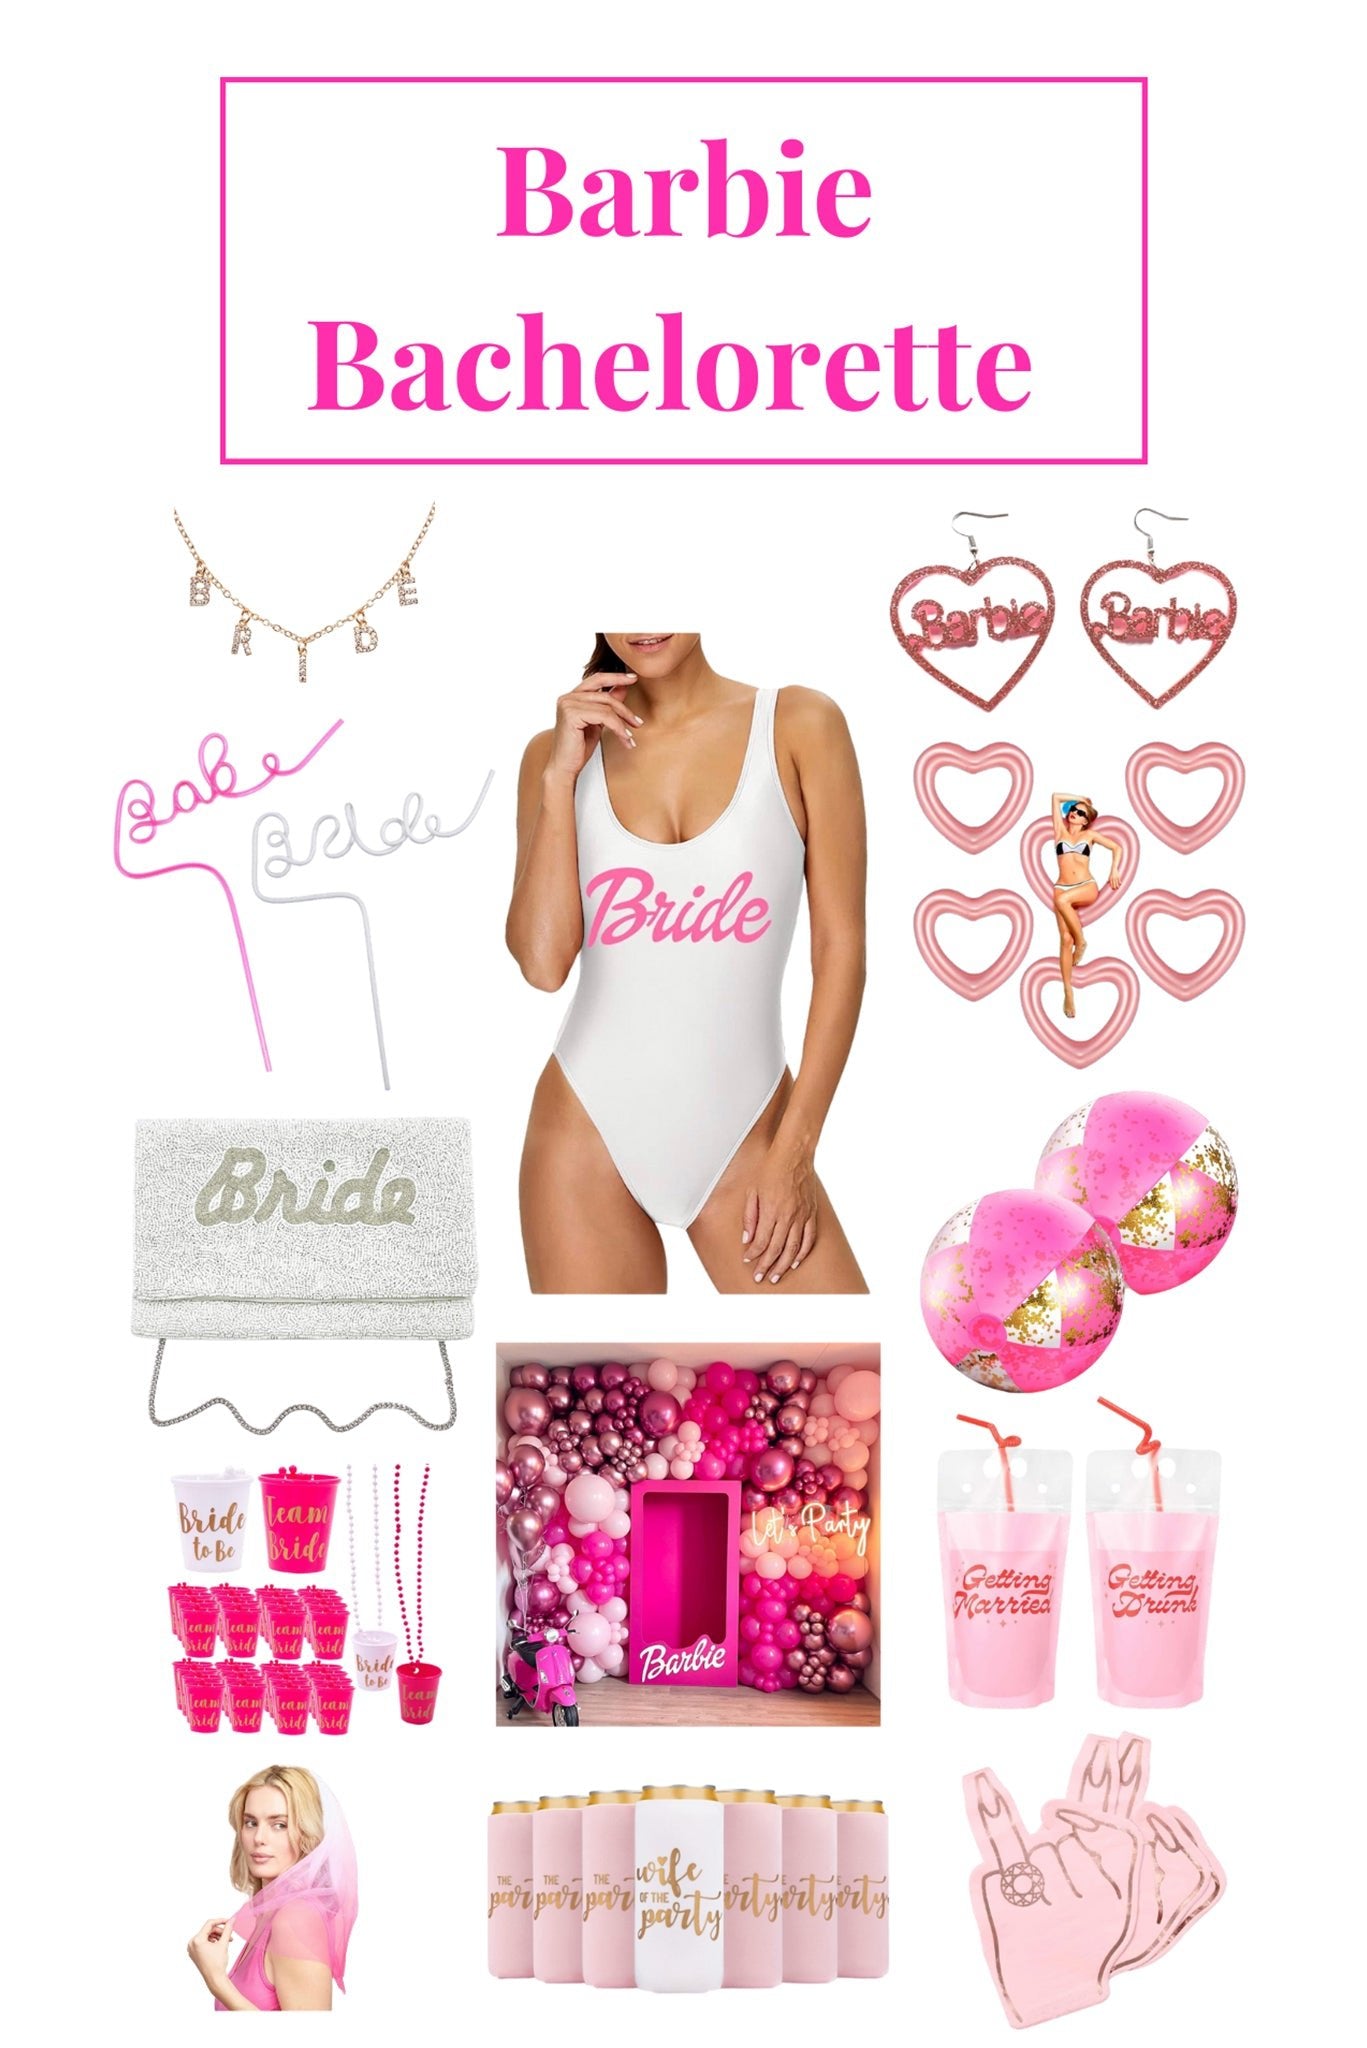 Amazon Finds for a Barbie Bachelorette Party - Pretty Collected